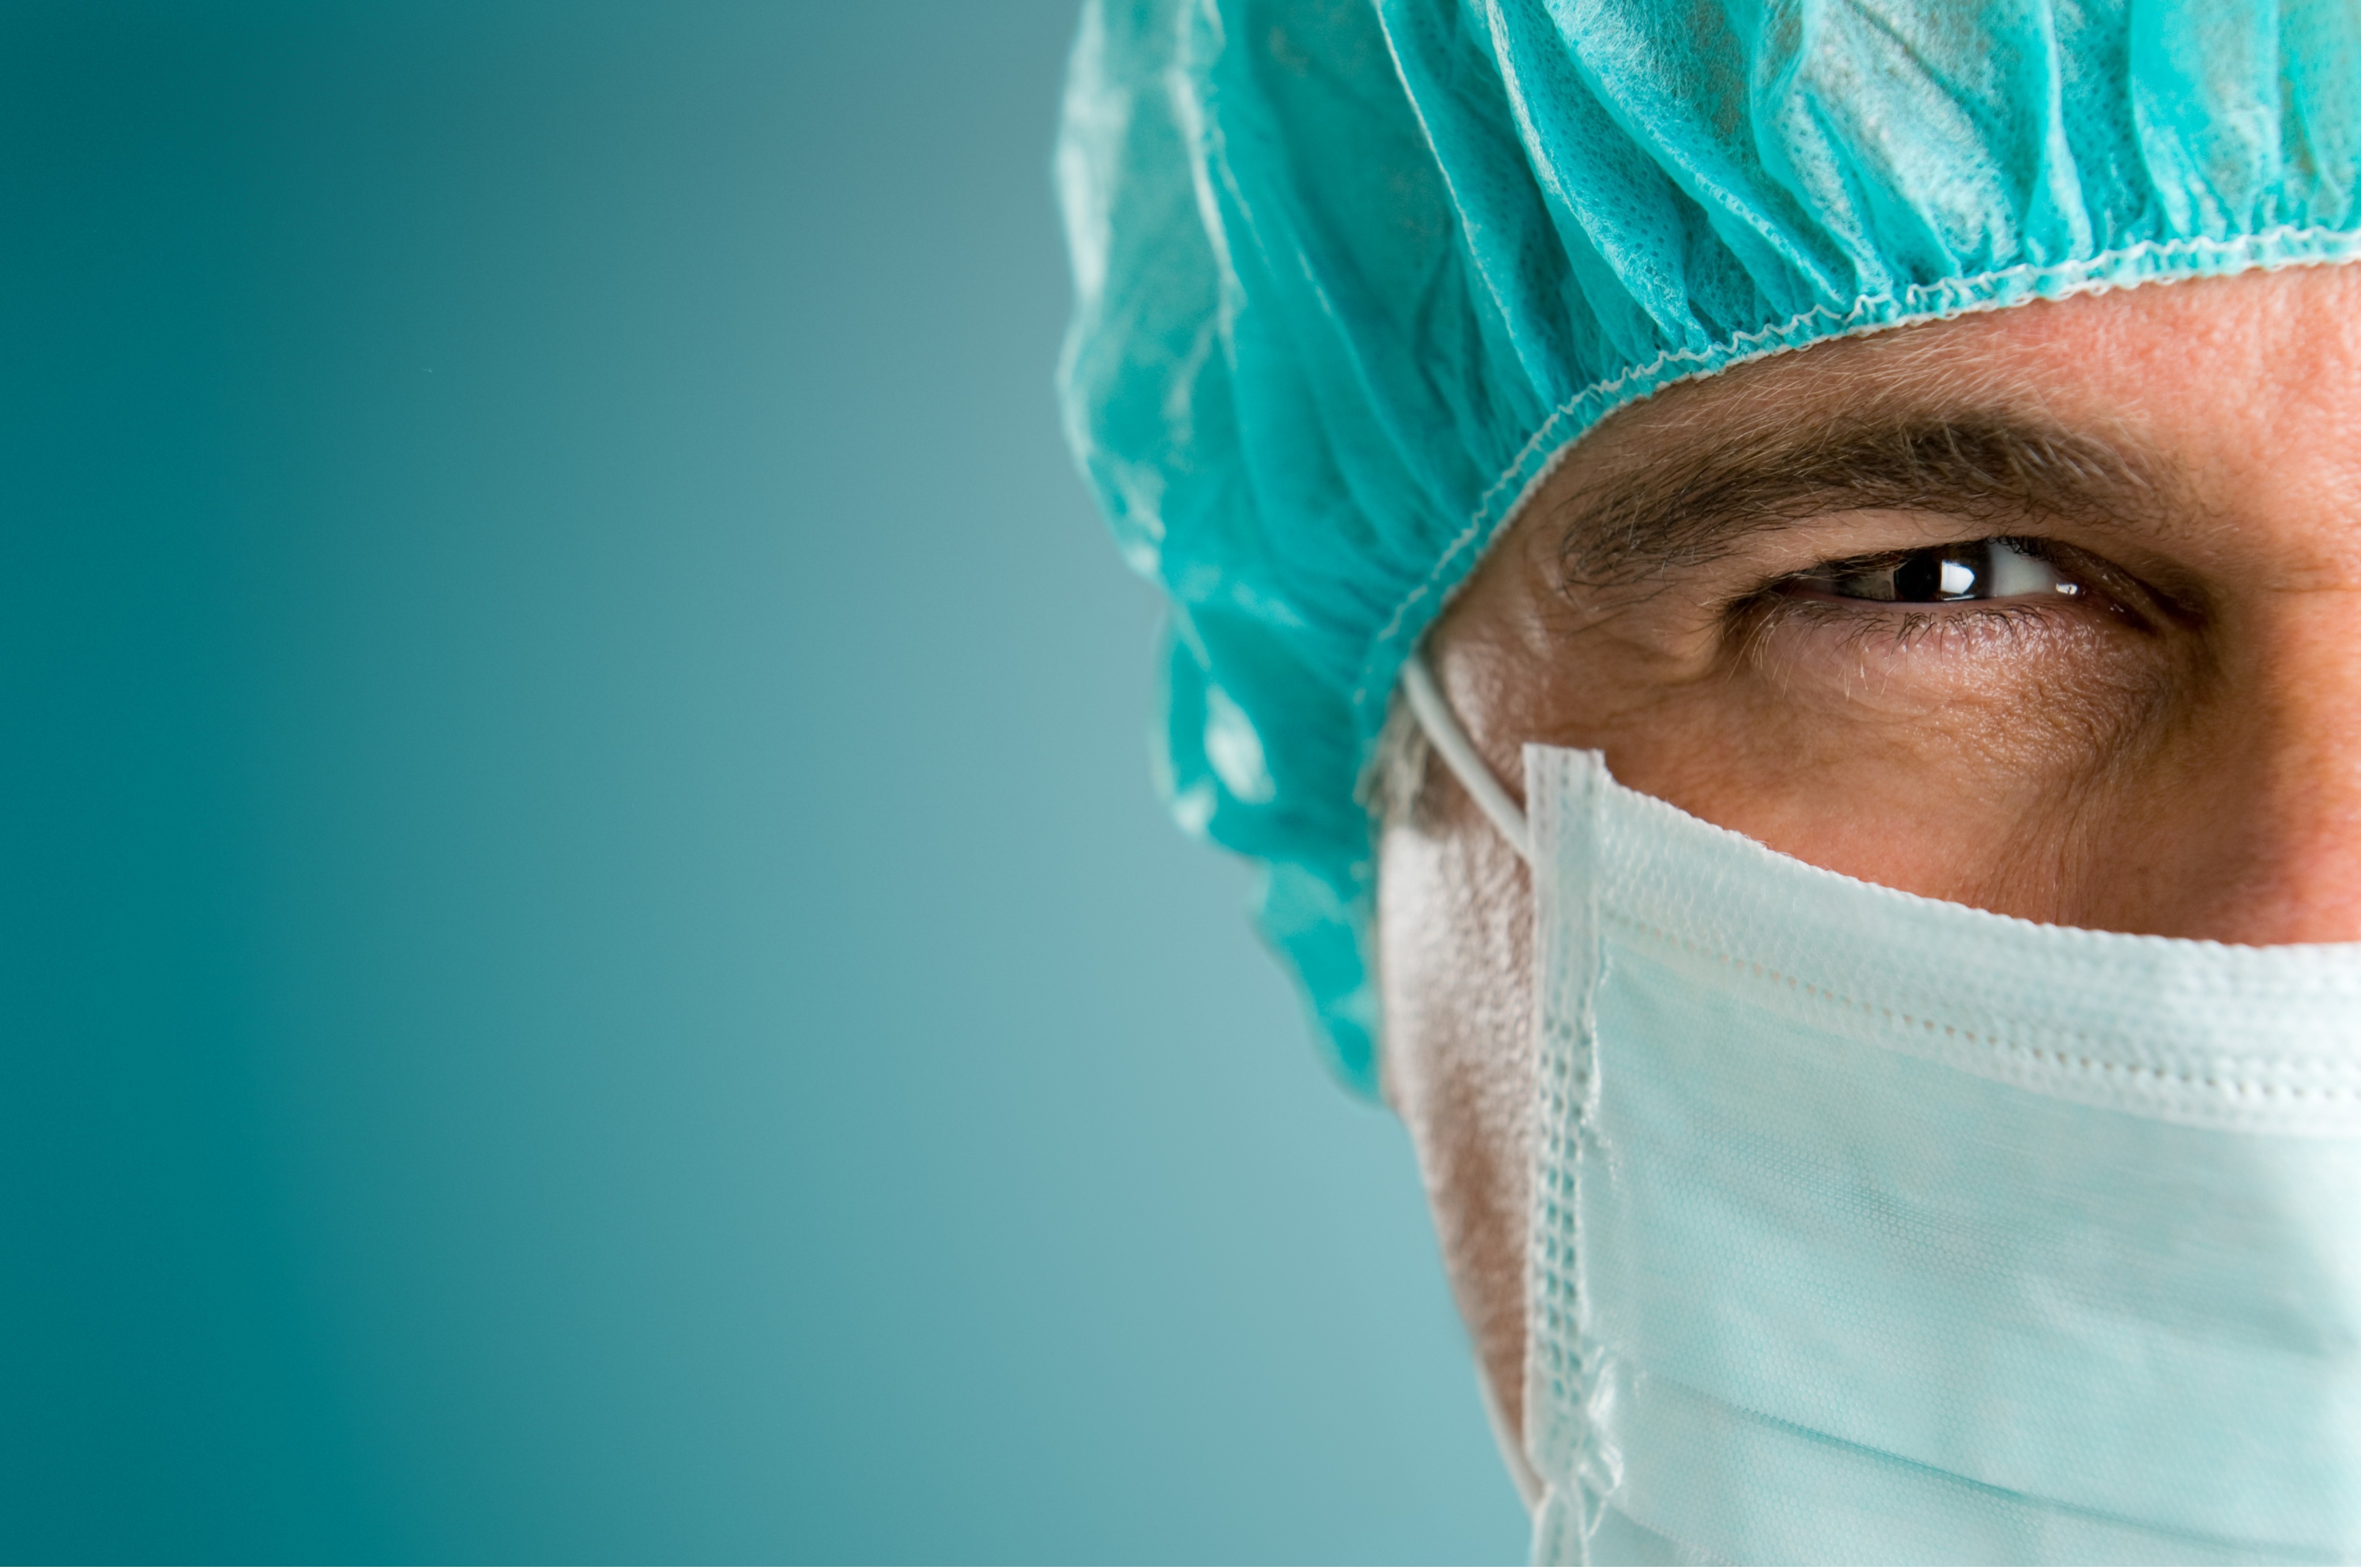 
What is a Vascular Surgeon?